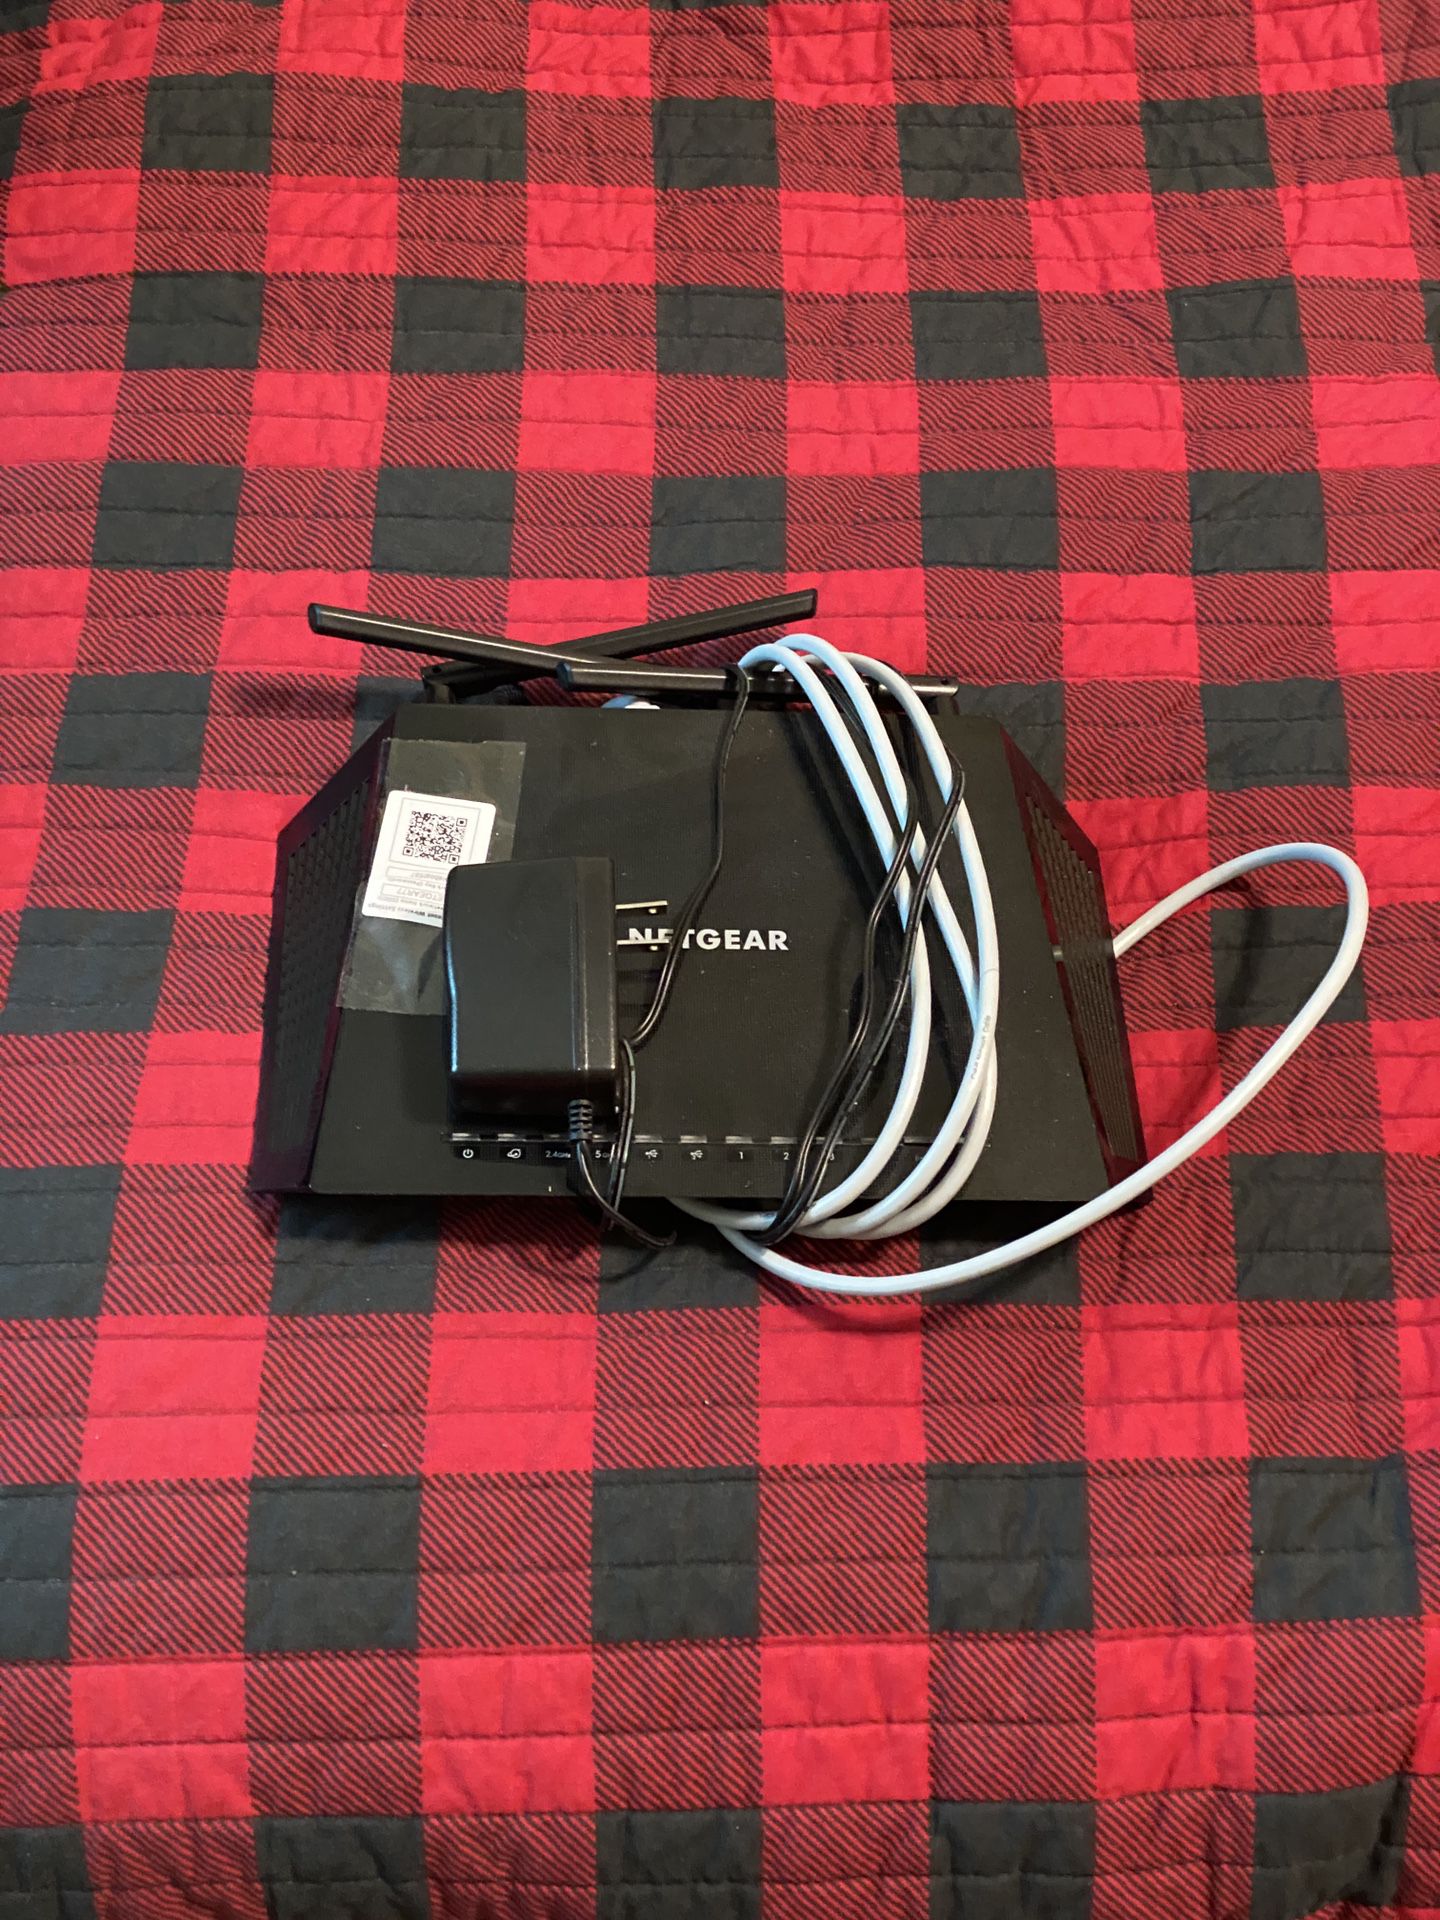 Netgear Wifi Router + Ethernet cable